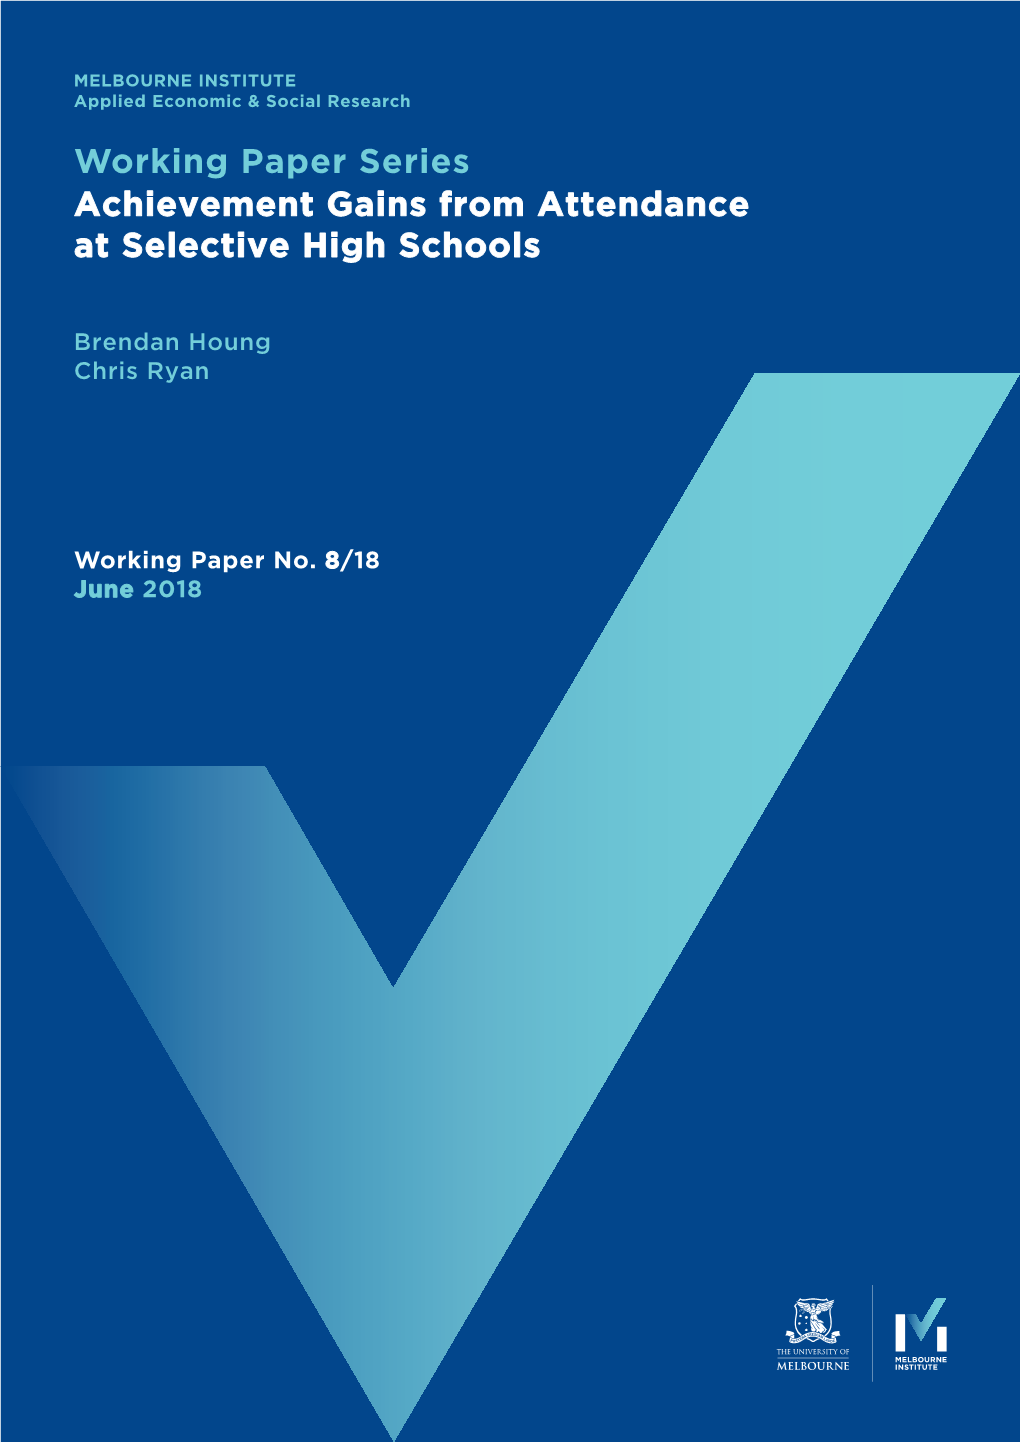 Achievement Gains from Attendance at Selective High Schools